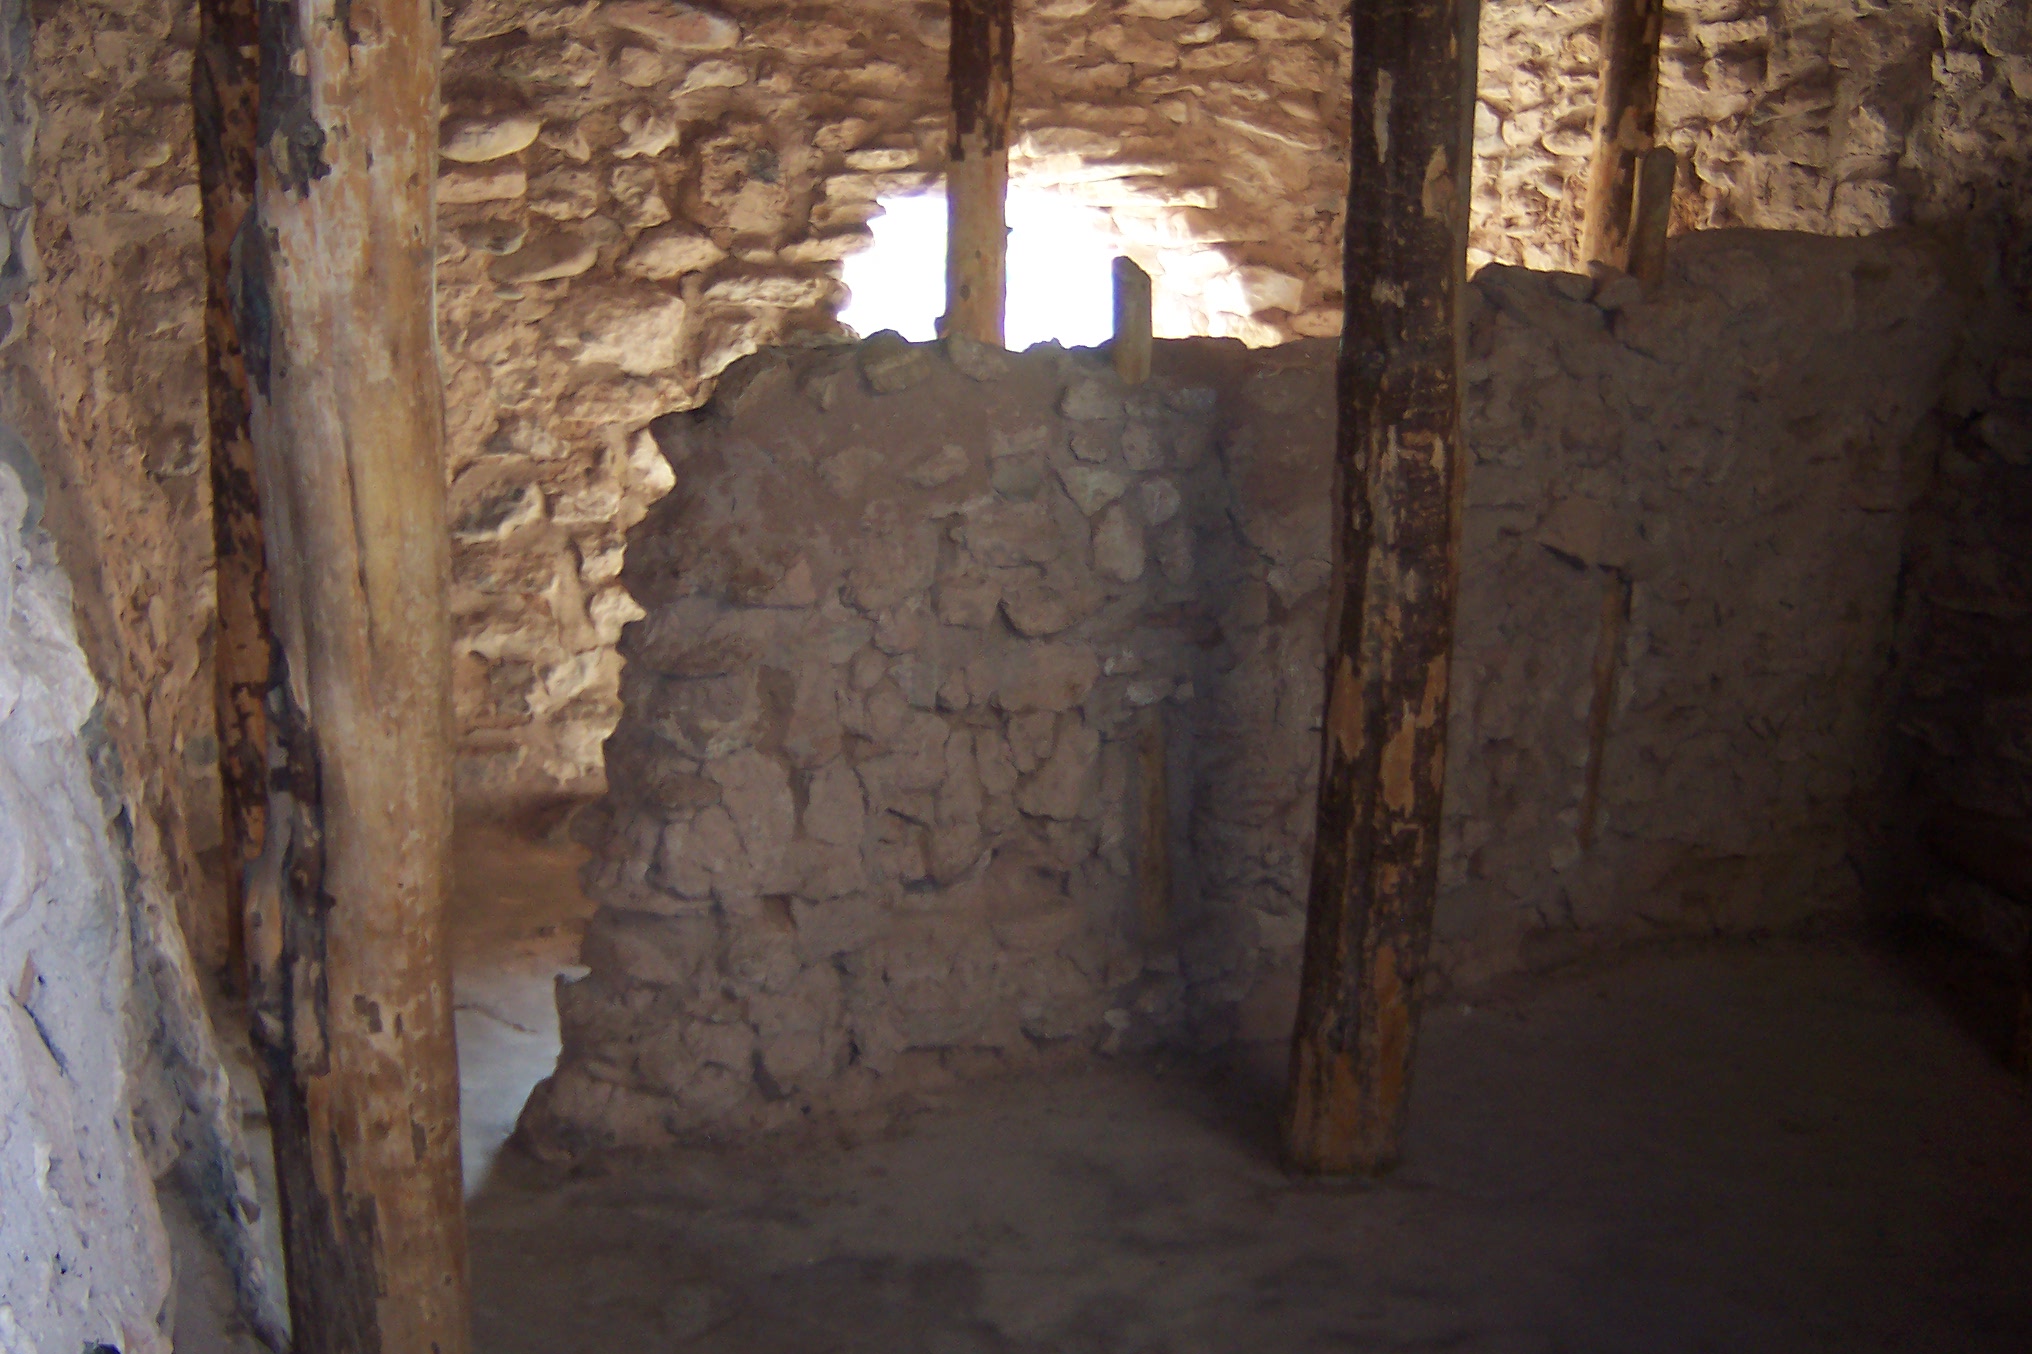 The inside of a masonry room with wood posts supporting the roof.